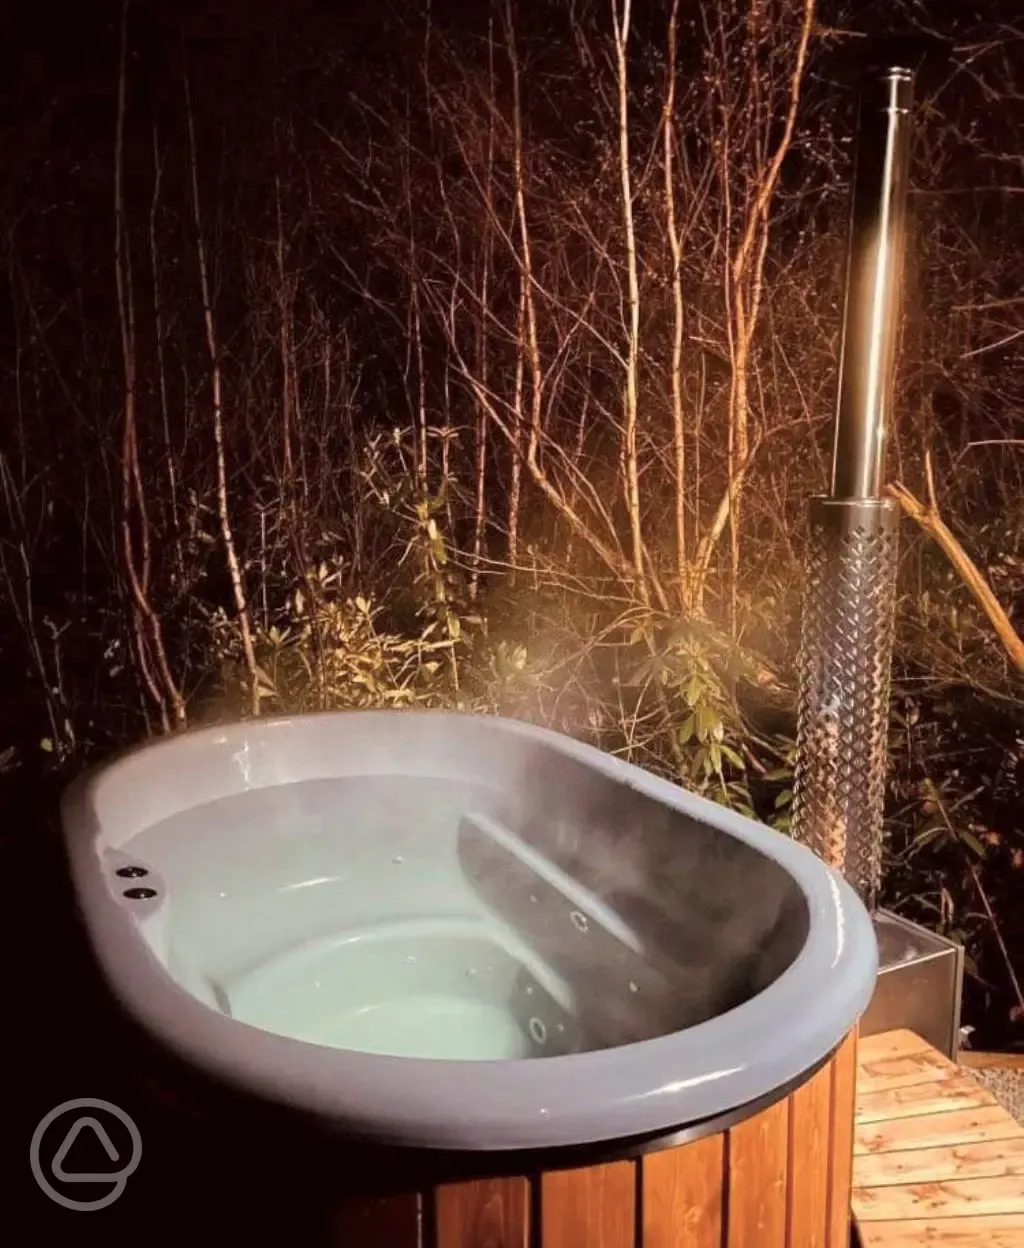 The Hollow hot tub